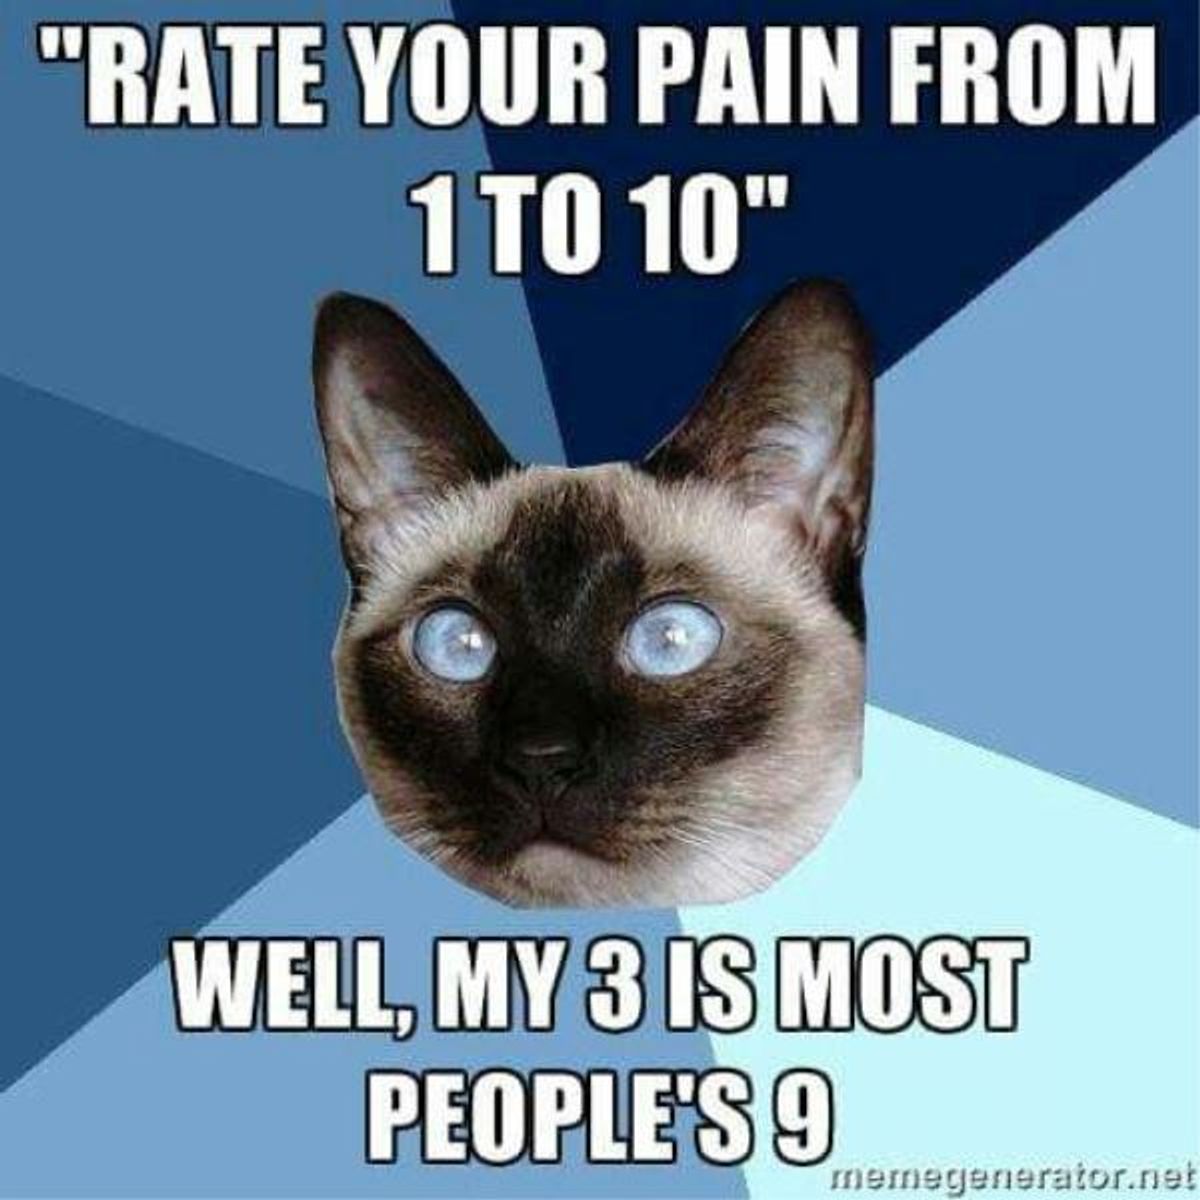 13 Things Someone With Chronic Pain Wants You To Know